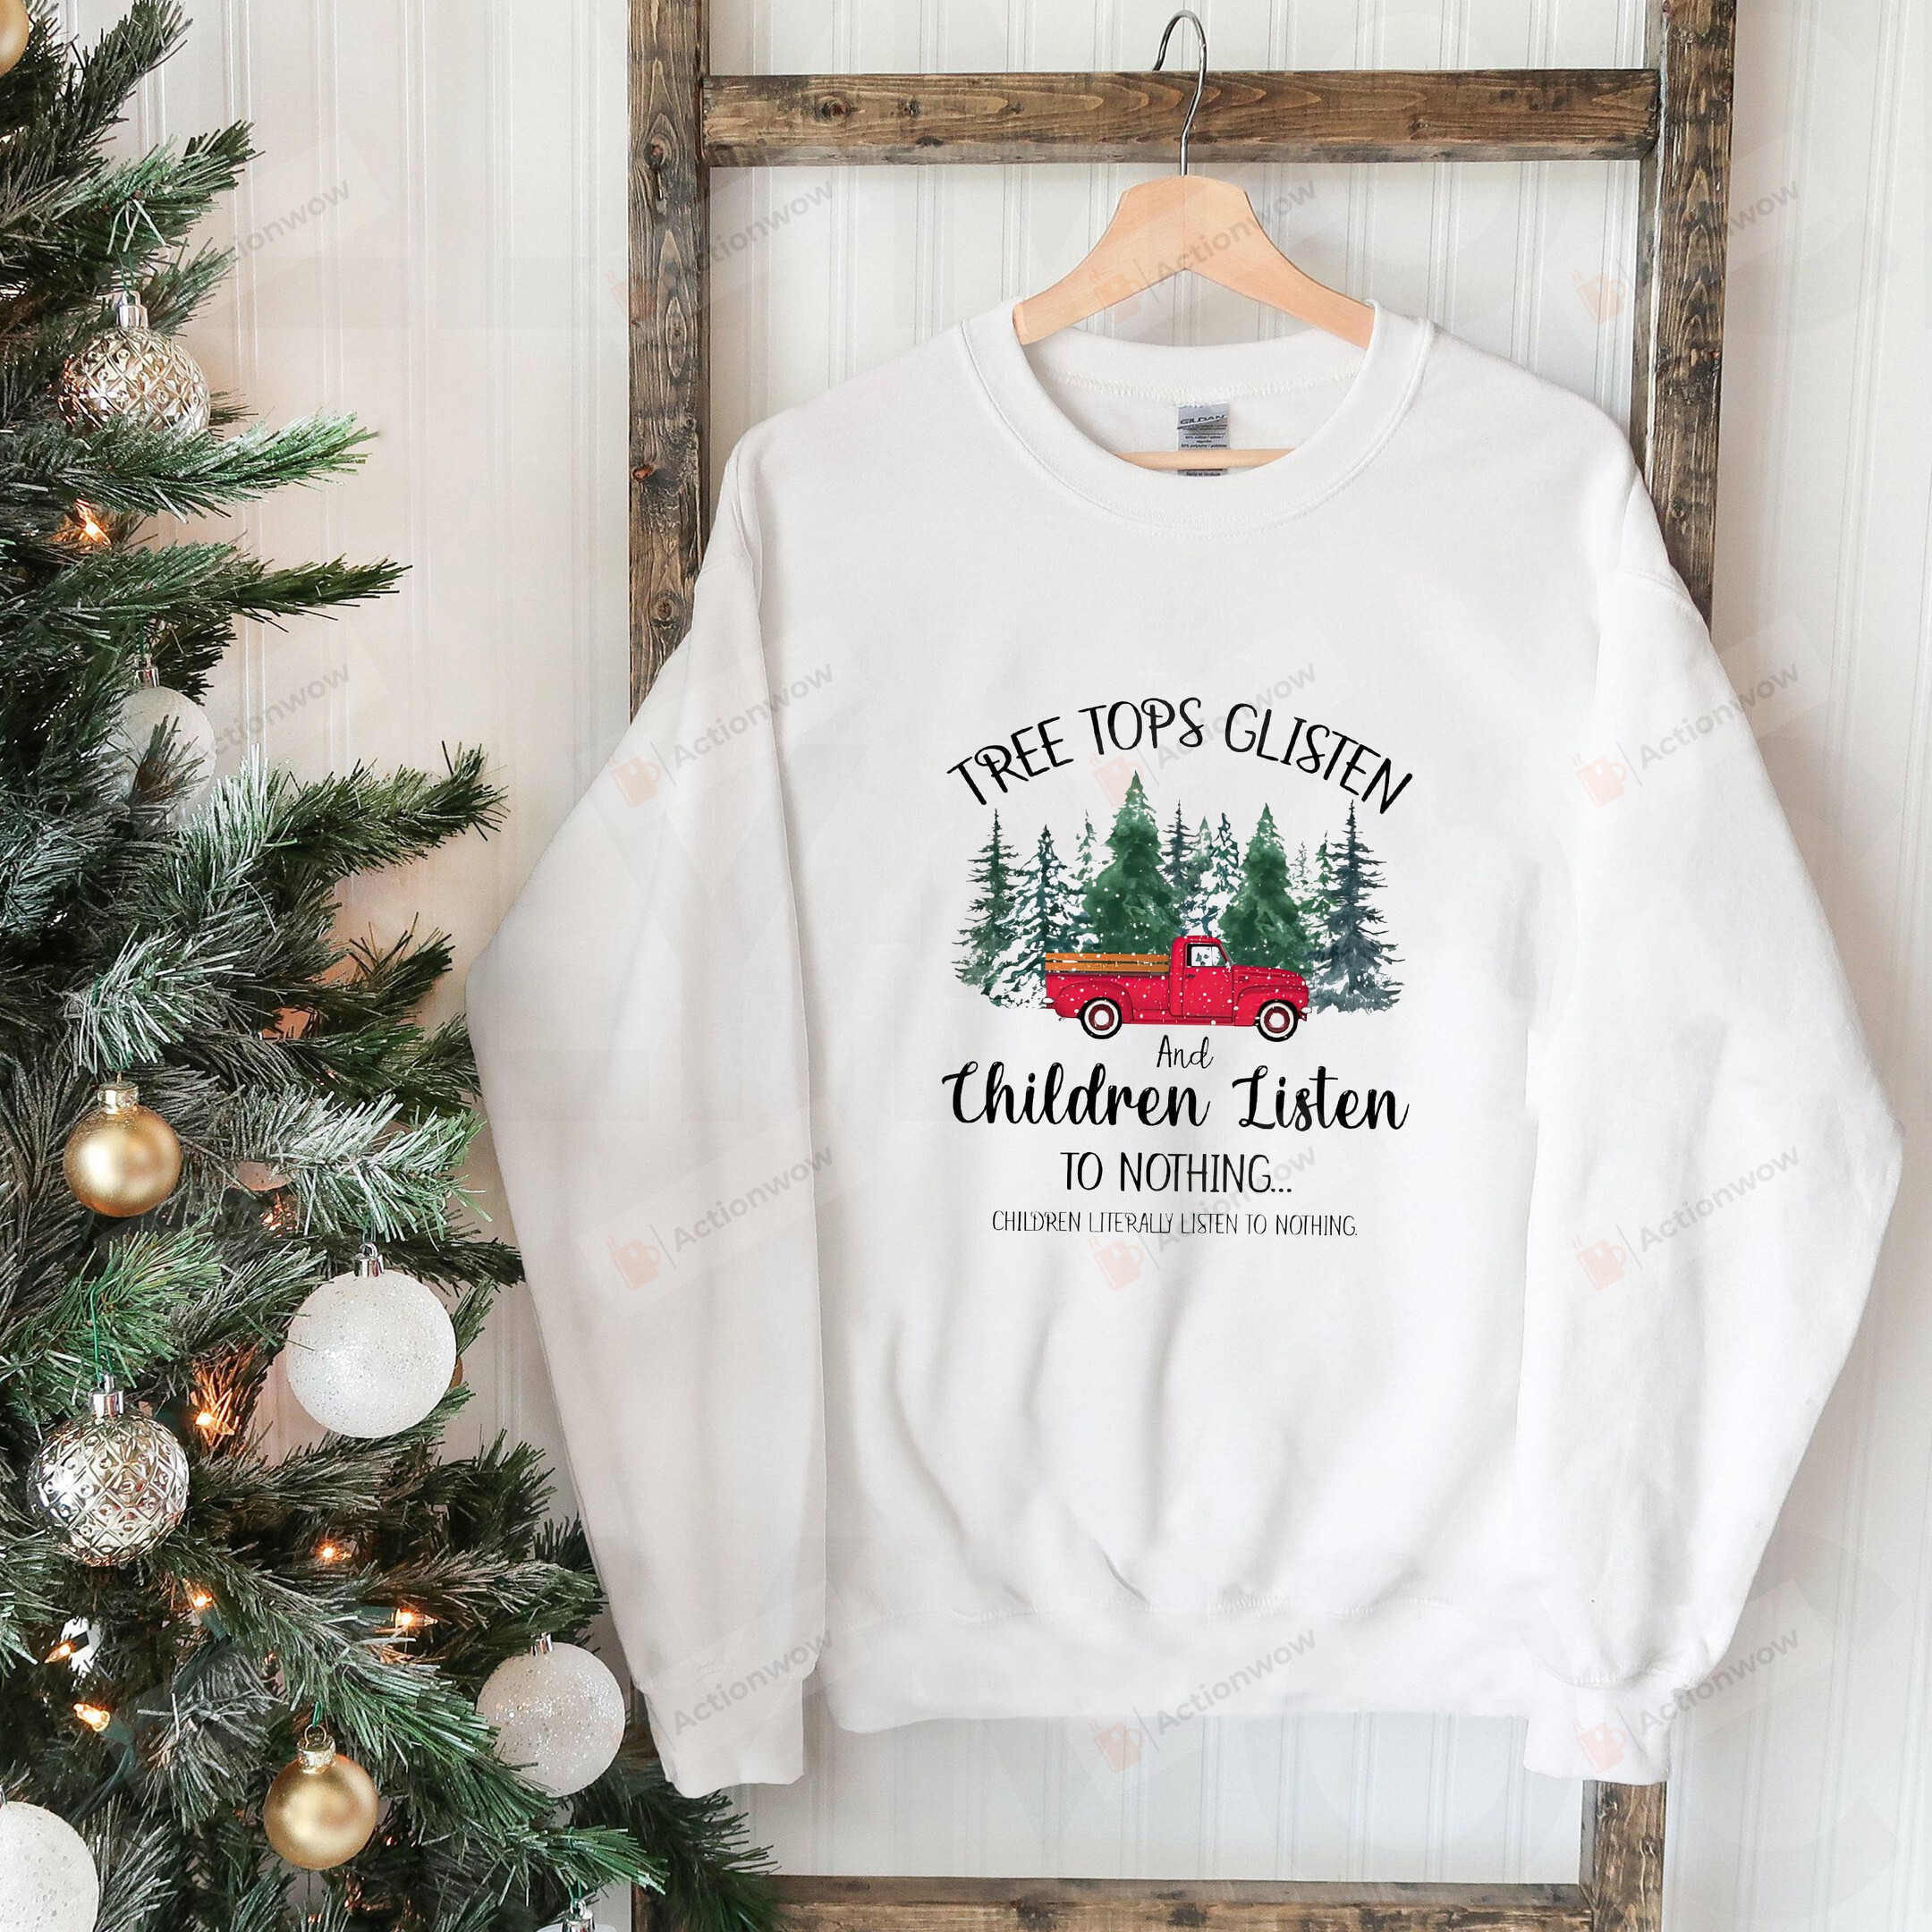 Tree Tops Glisten And Children Listen To Nothing Sweatshirt, Mom Christmas, Funny Christmas Shirt, Family Christmas Tshirt Sweatshirt Hoodie, Christmas Holiday Gifts For Women For Men